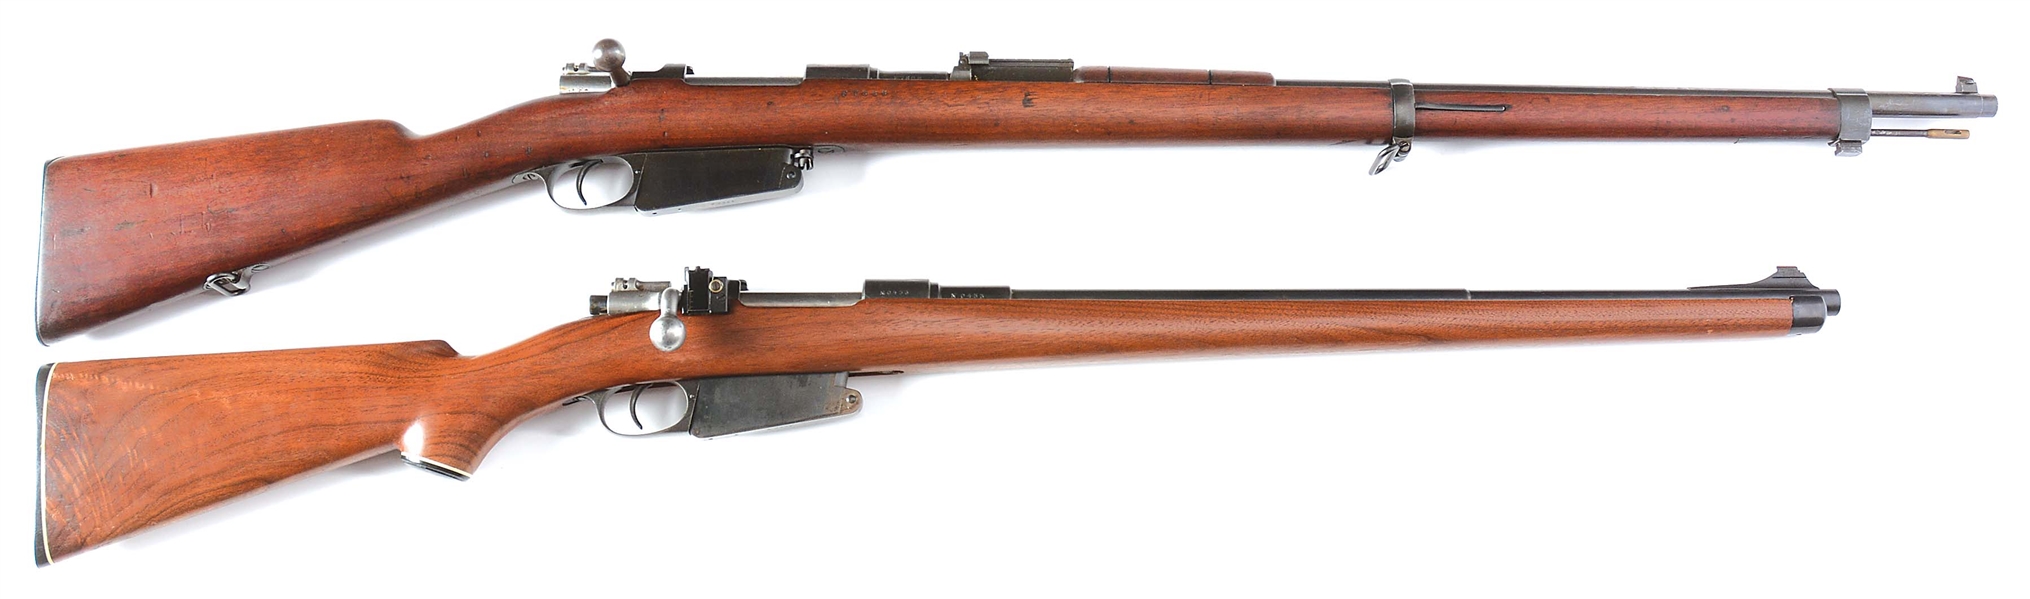 (C) LOT OF 2: MAUSER ARGENTINO 1891 BOLT ACTION RIFLES.